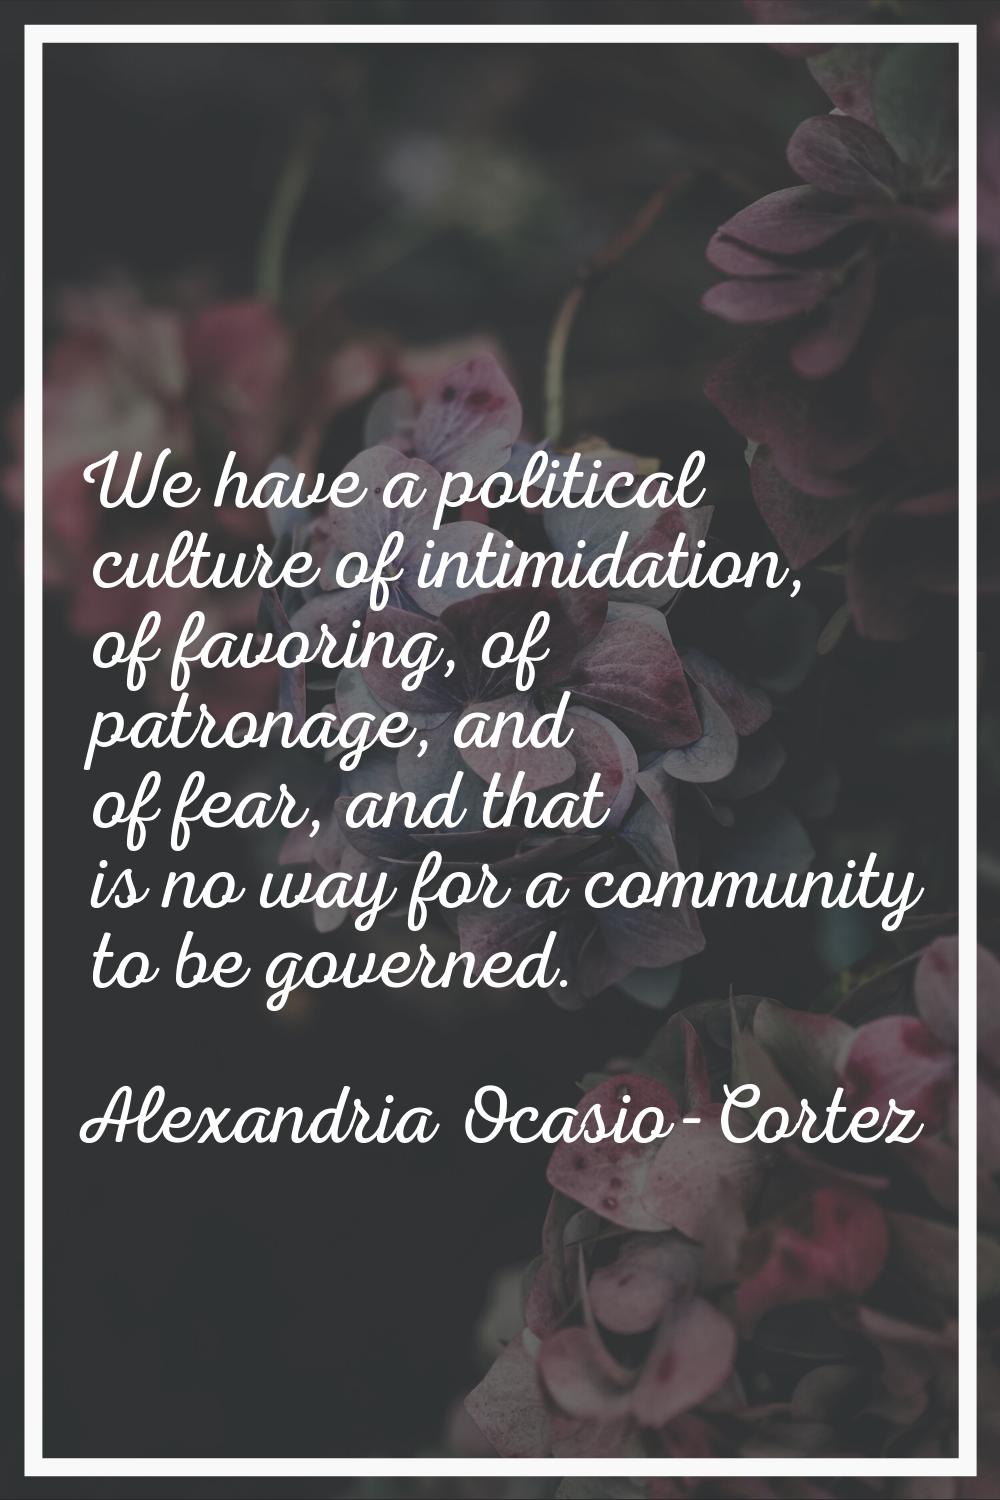 We have a political culture of intimidation, of favoring, of patronage, and of fear, and that is no